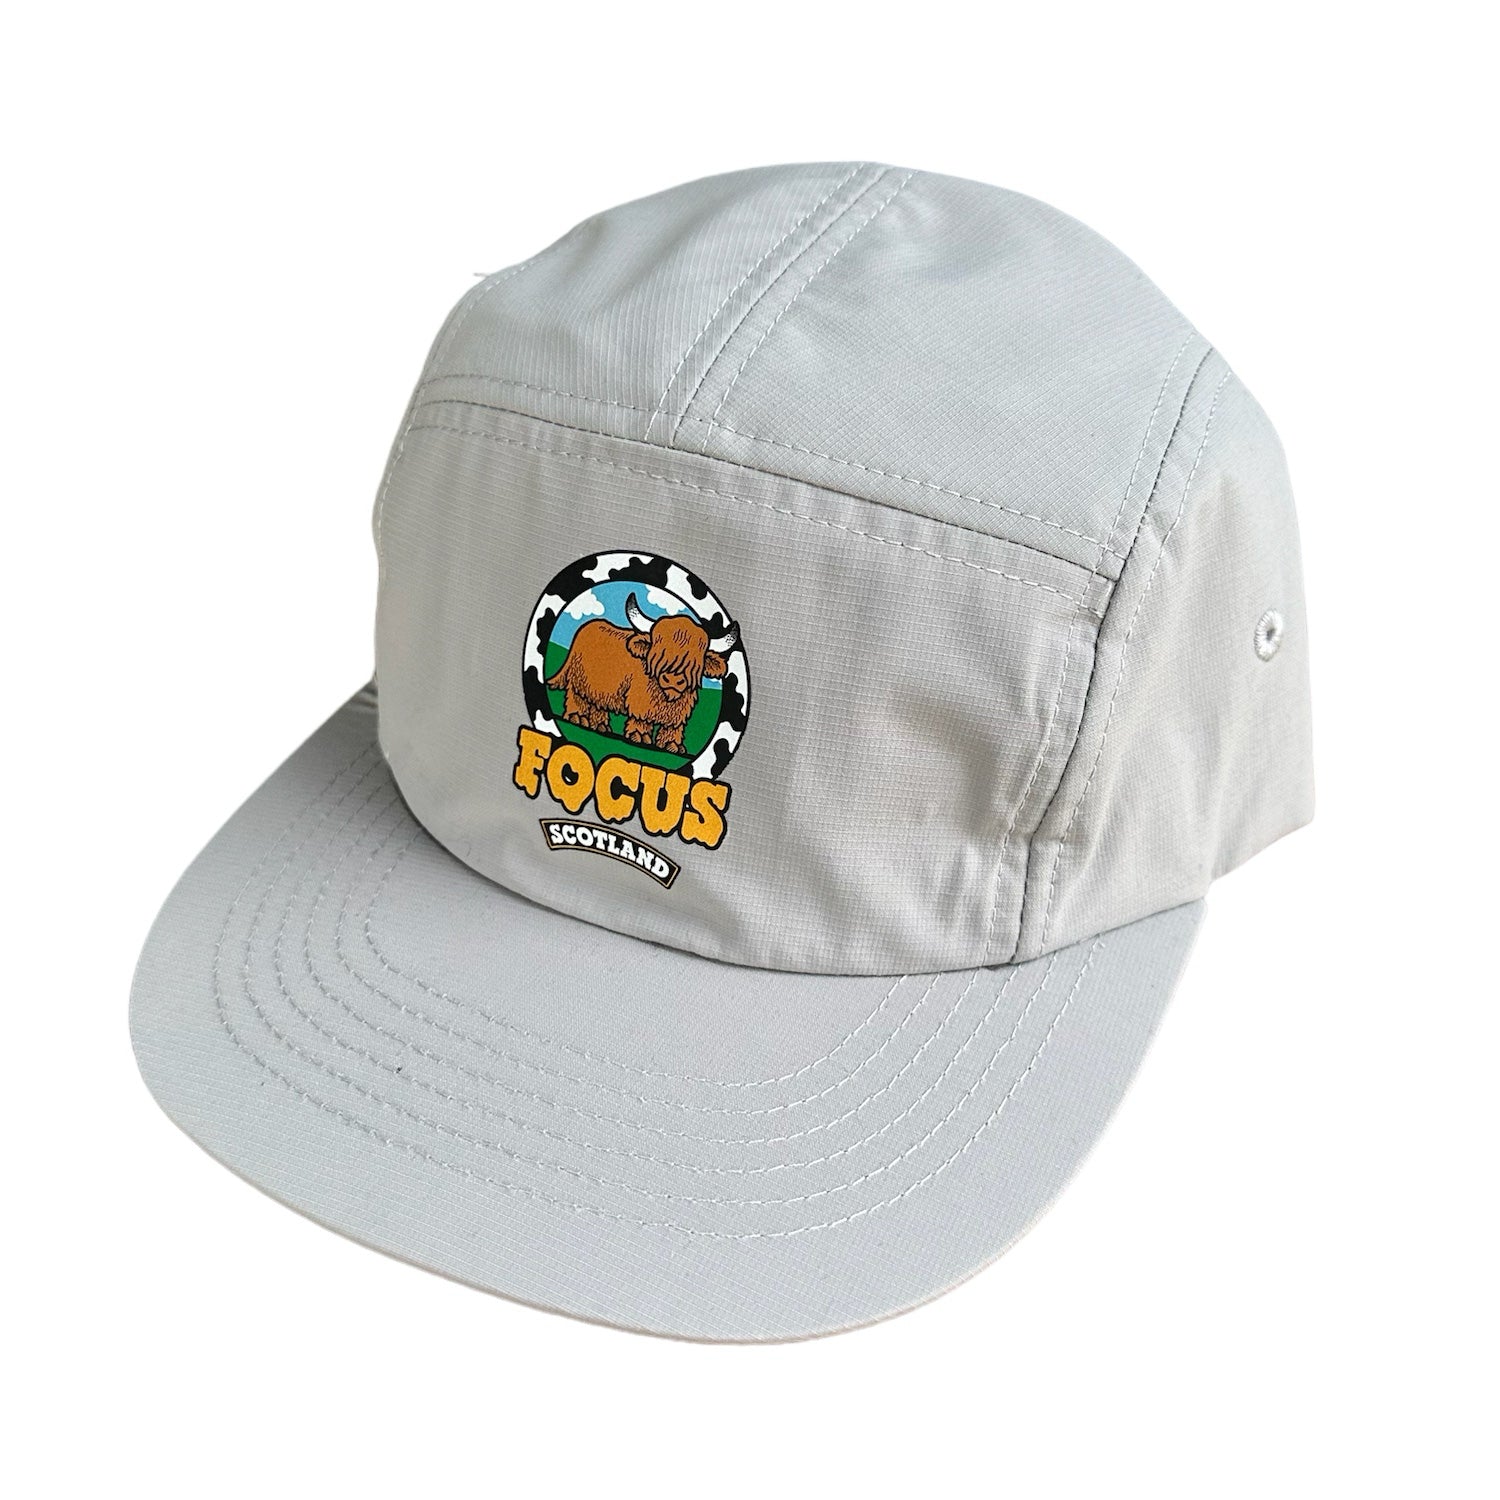 Focus Melted Coo Ripstop 5 Panel Cap - Light Grey